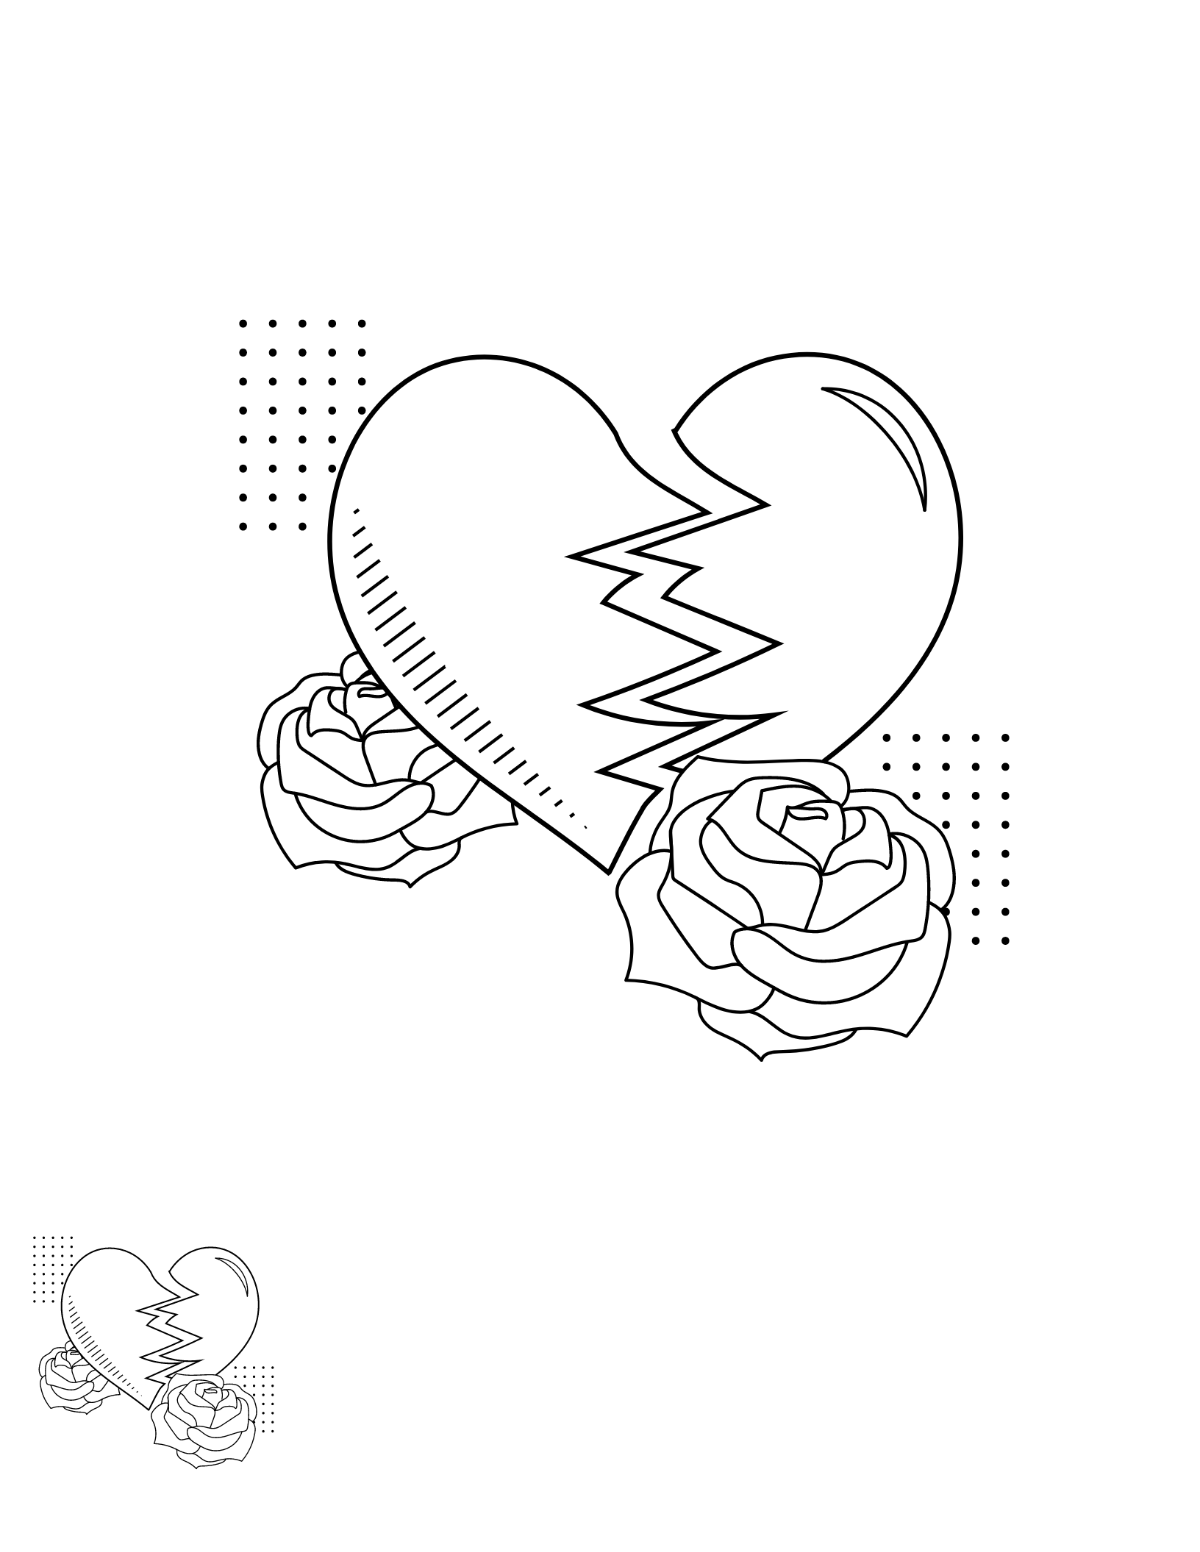 Broken Heart and Roses Coloring Page Template